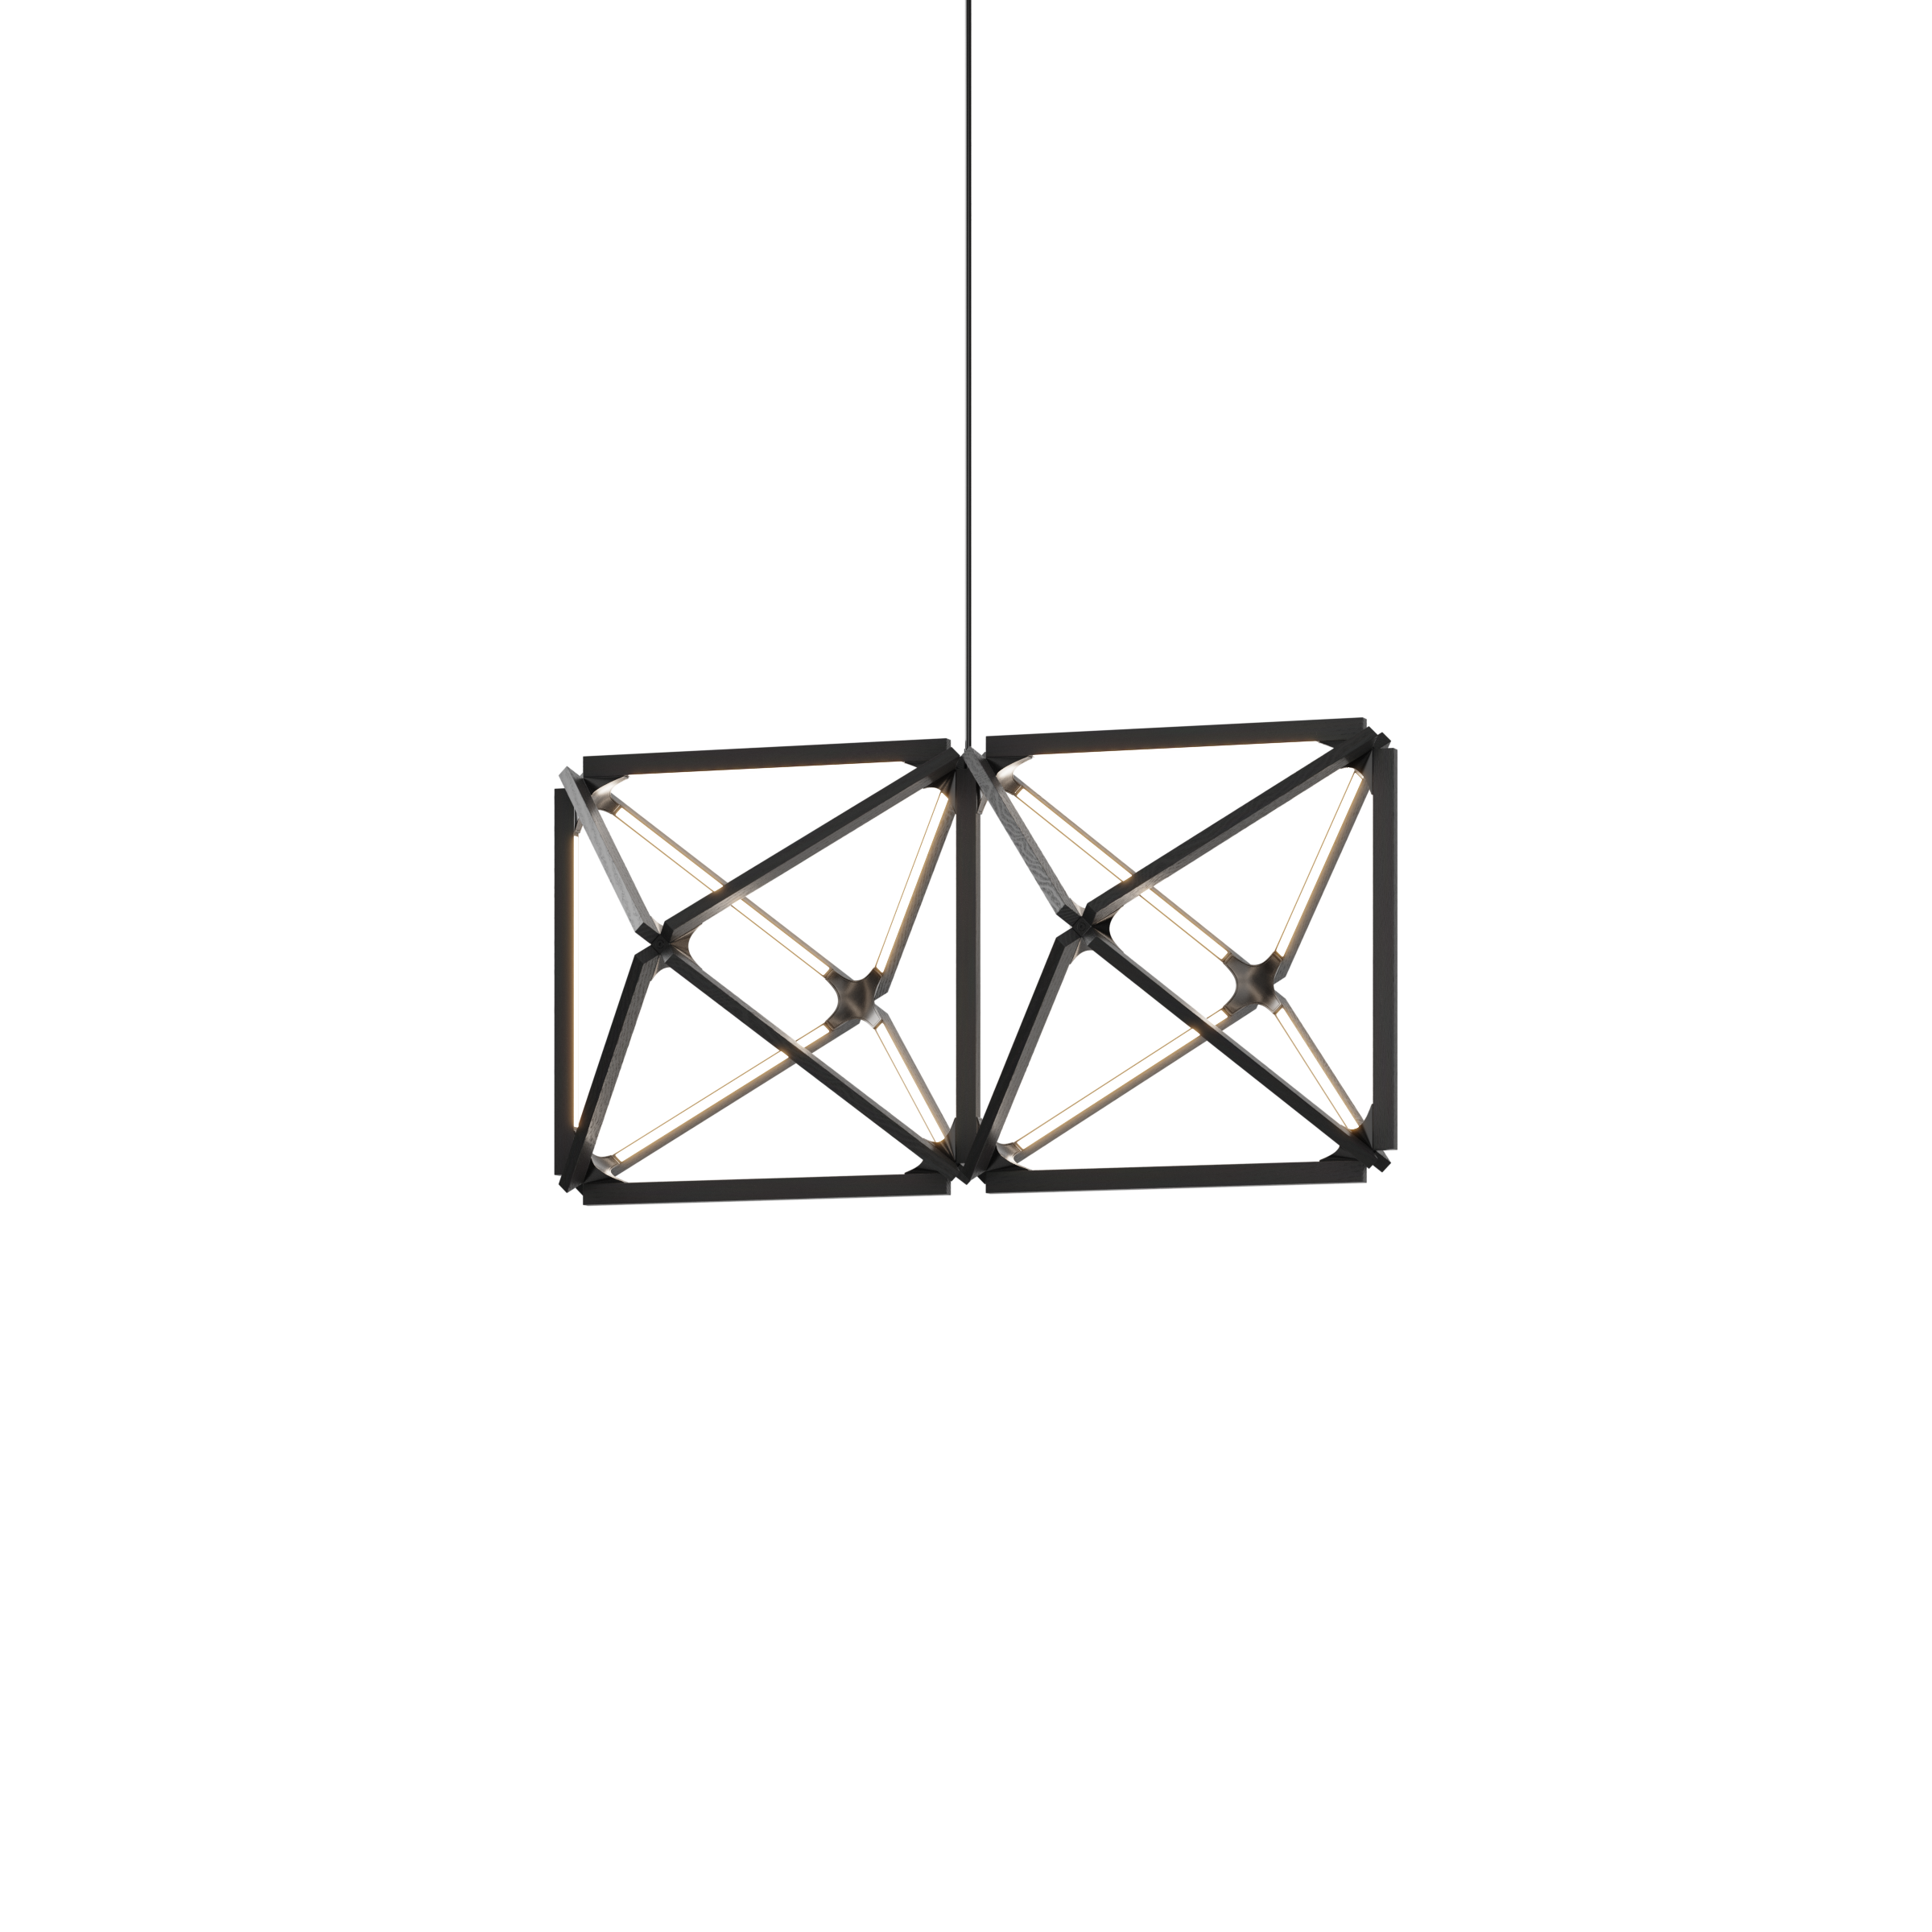 Image of a Stickbulb Truss lighting fixture. The modern fixture consists of sleek wooden beams with multiple integrated LED bulbs.